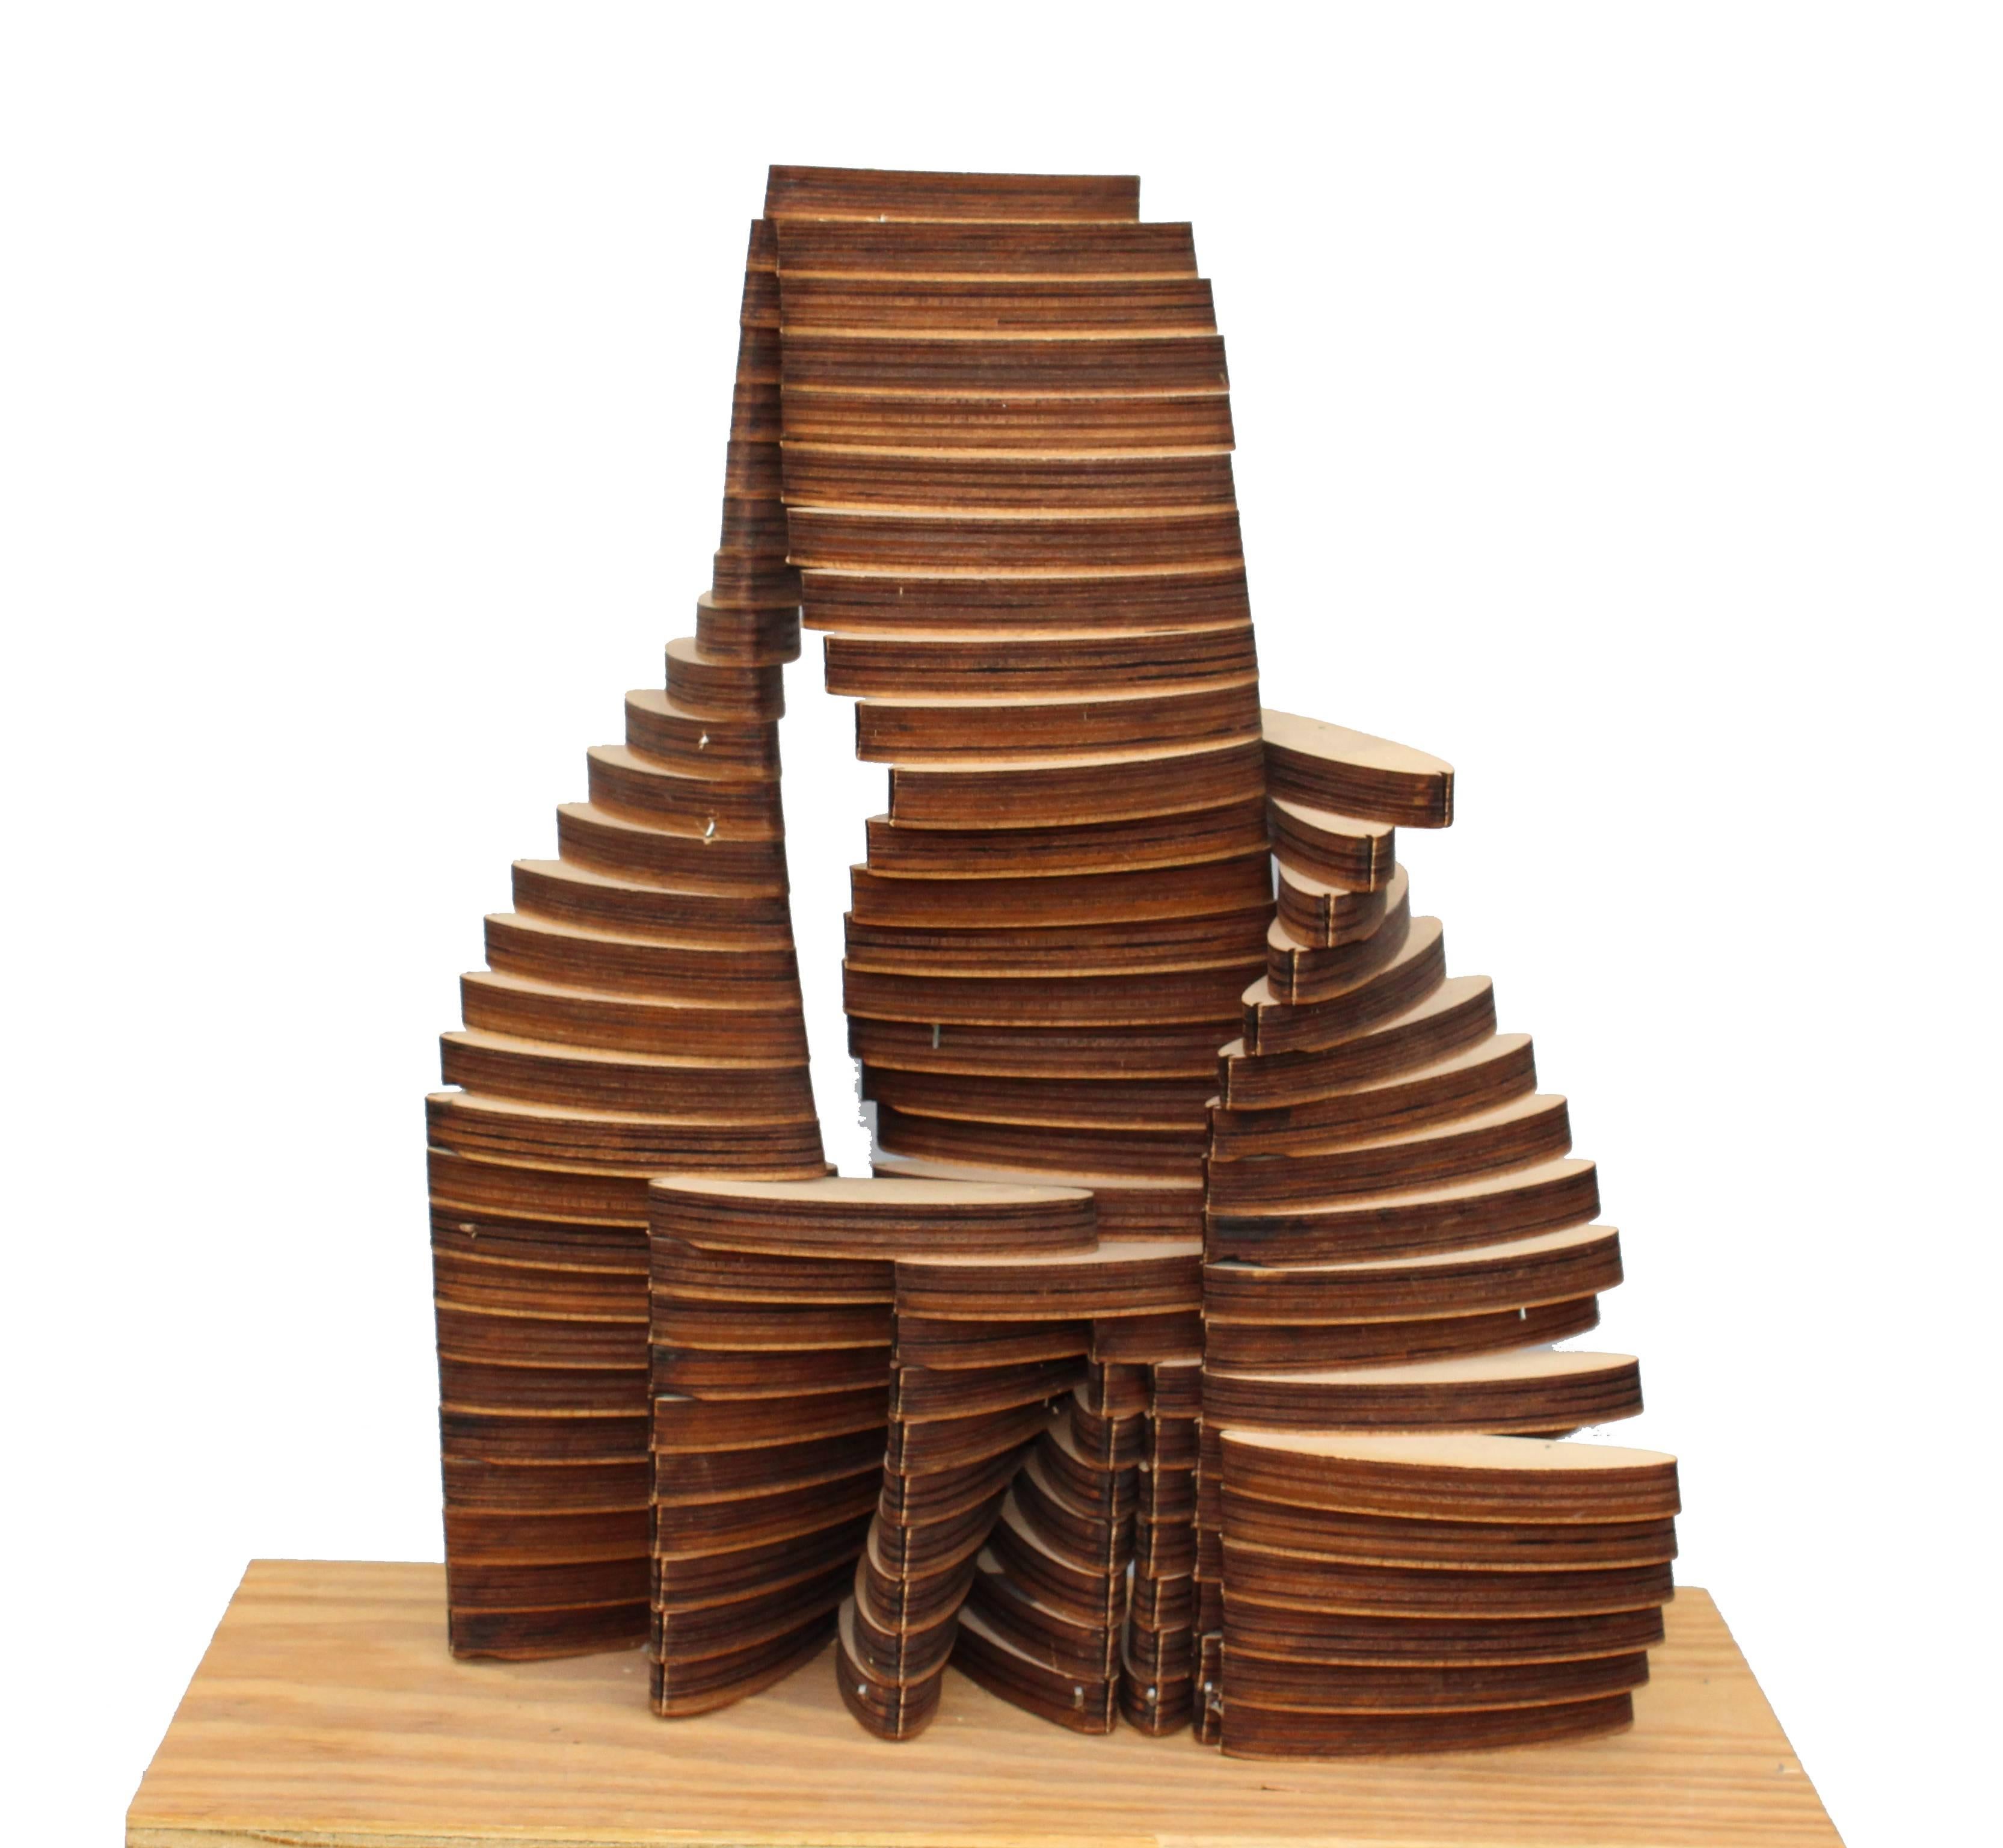 Stacked 1 - Sculpture by Scott Bye